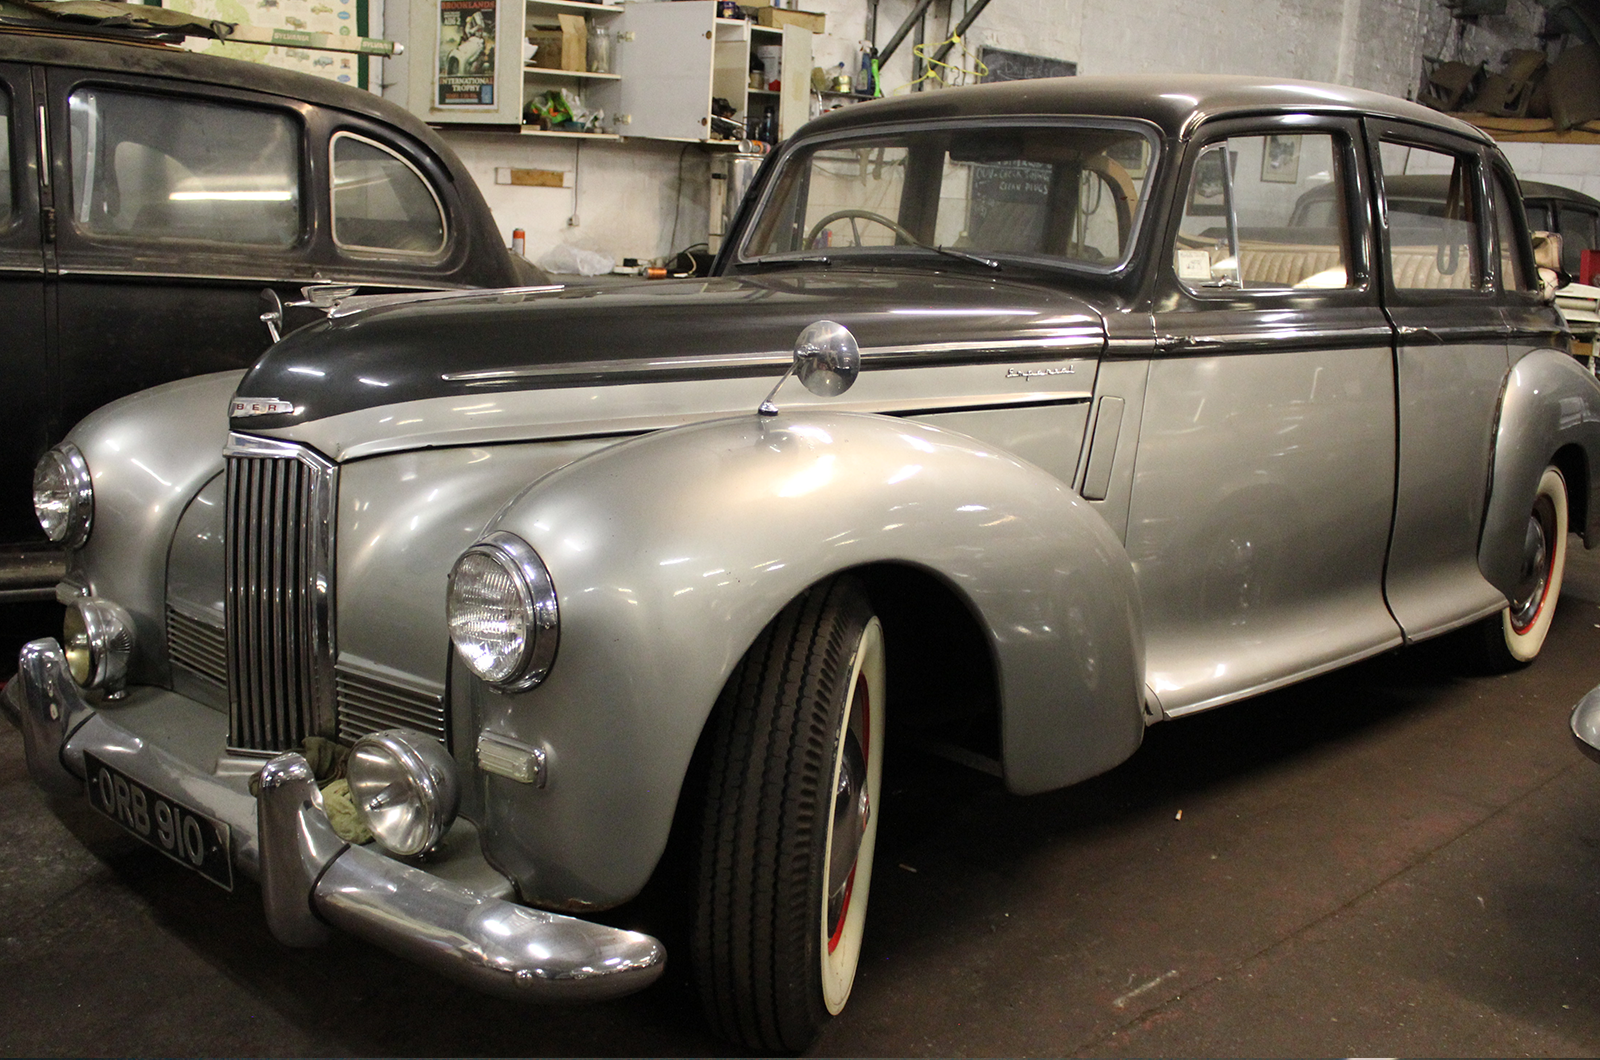 Classic & Sports Car – 16-strong Humber collection goes under the hammer